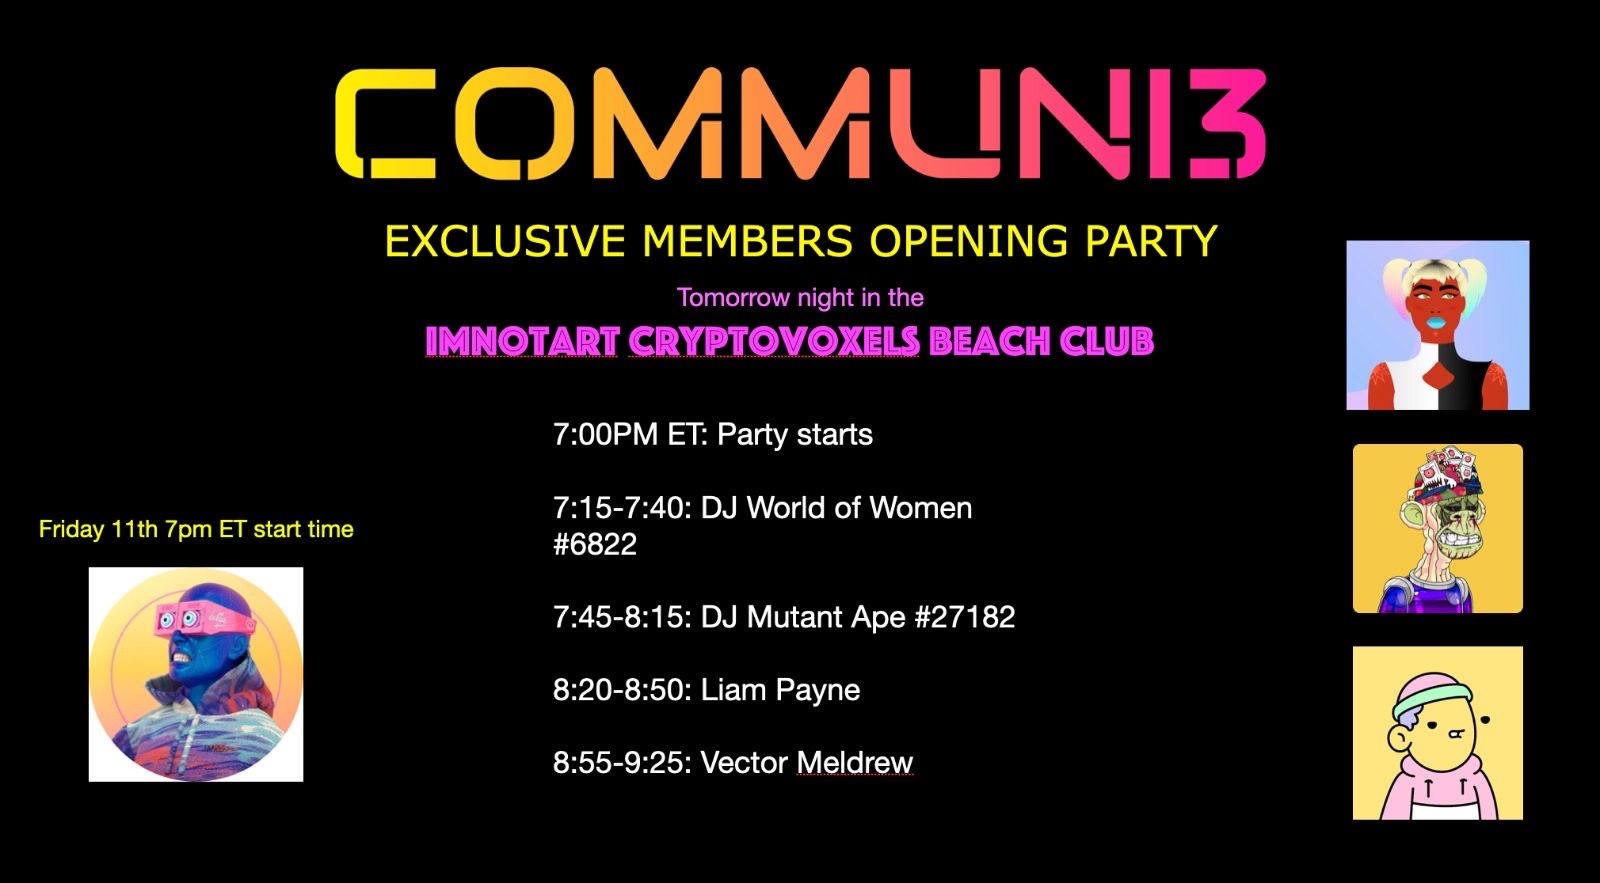 Tonight is the incredible COMMUNI3 opening party!